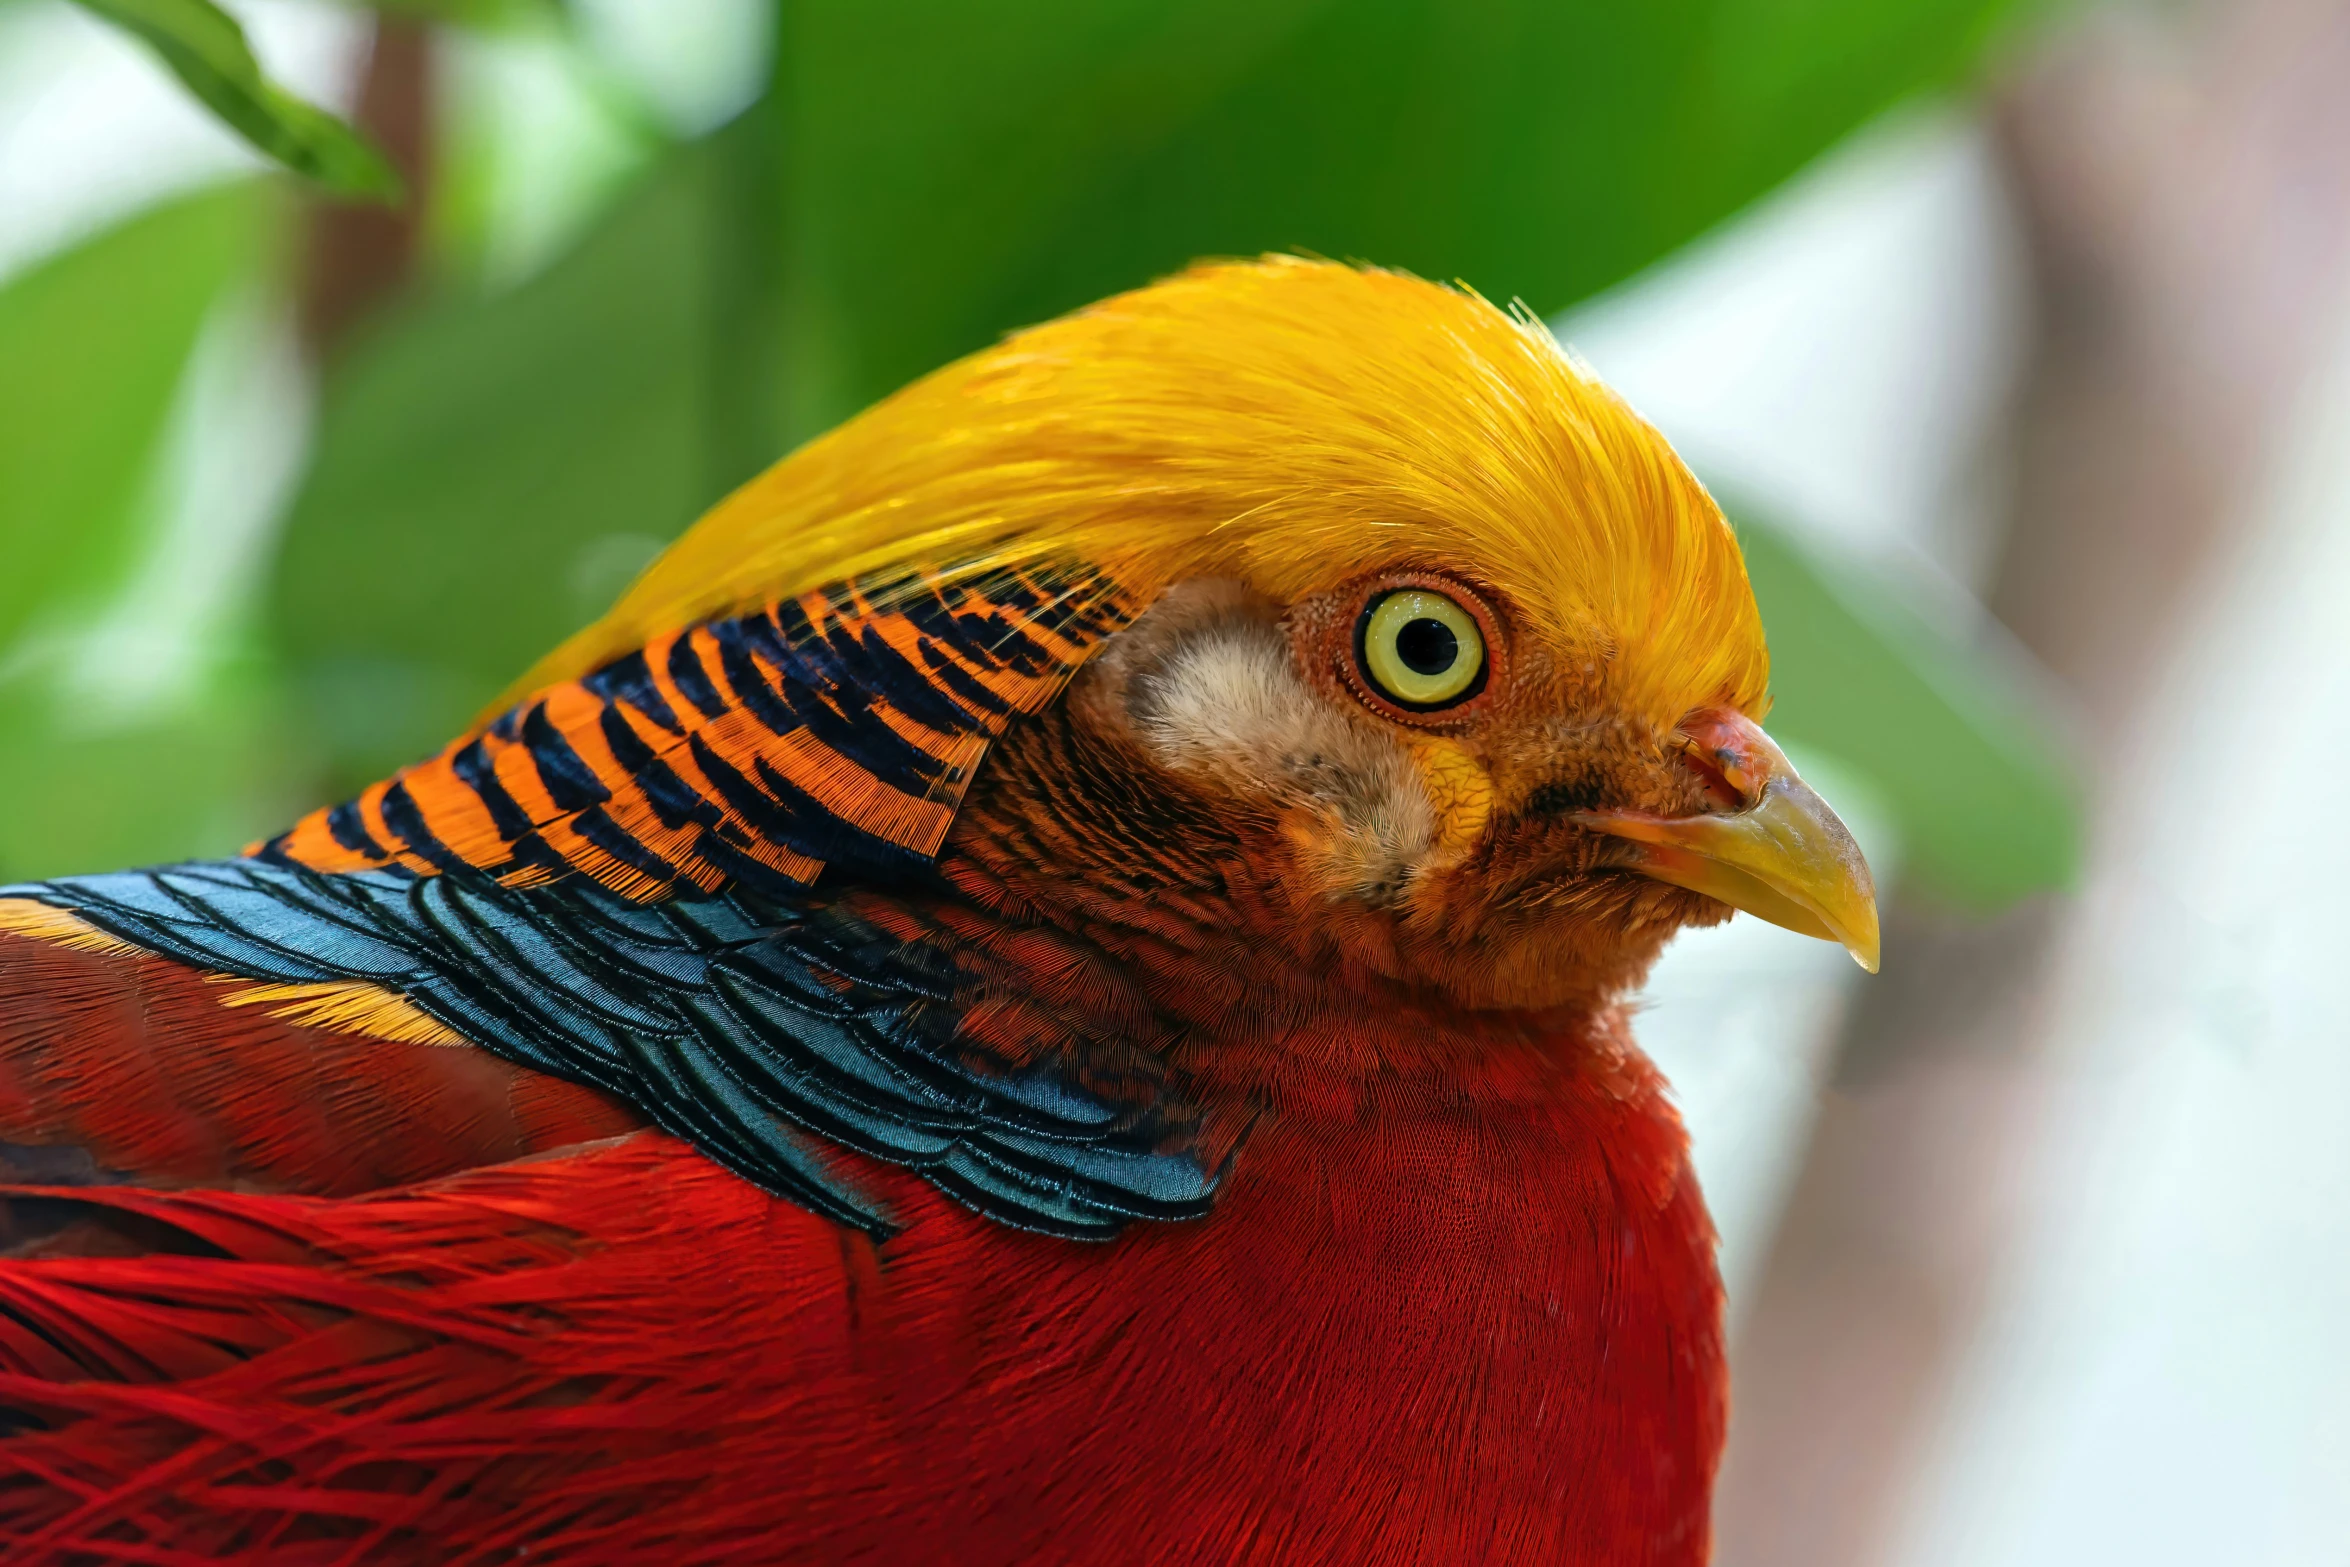 a close up s of a colorful bird